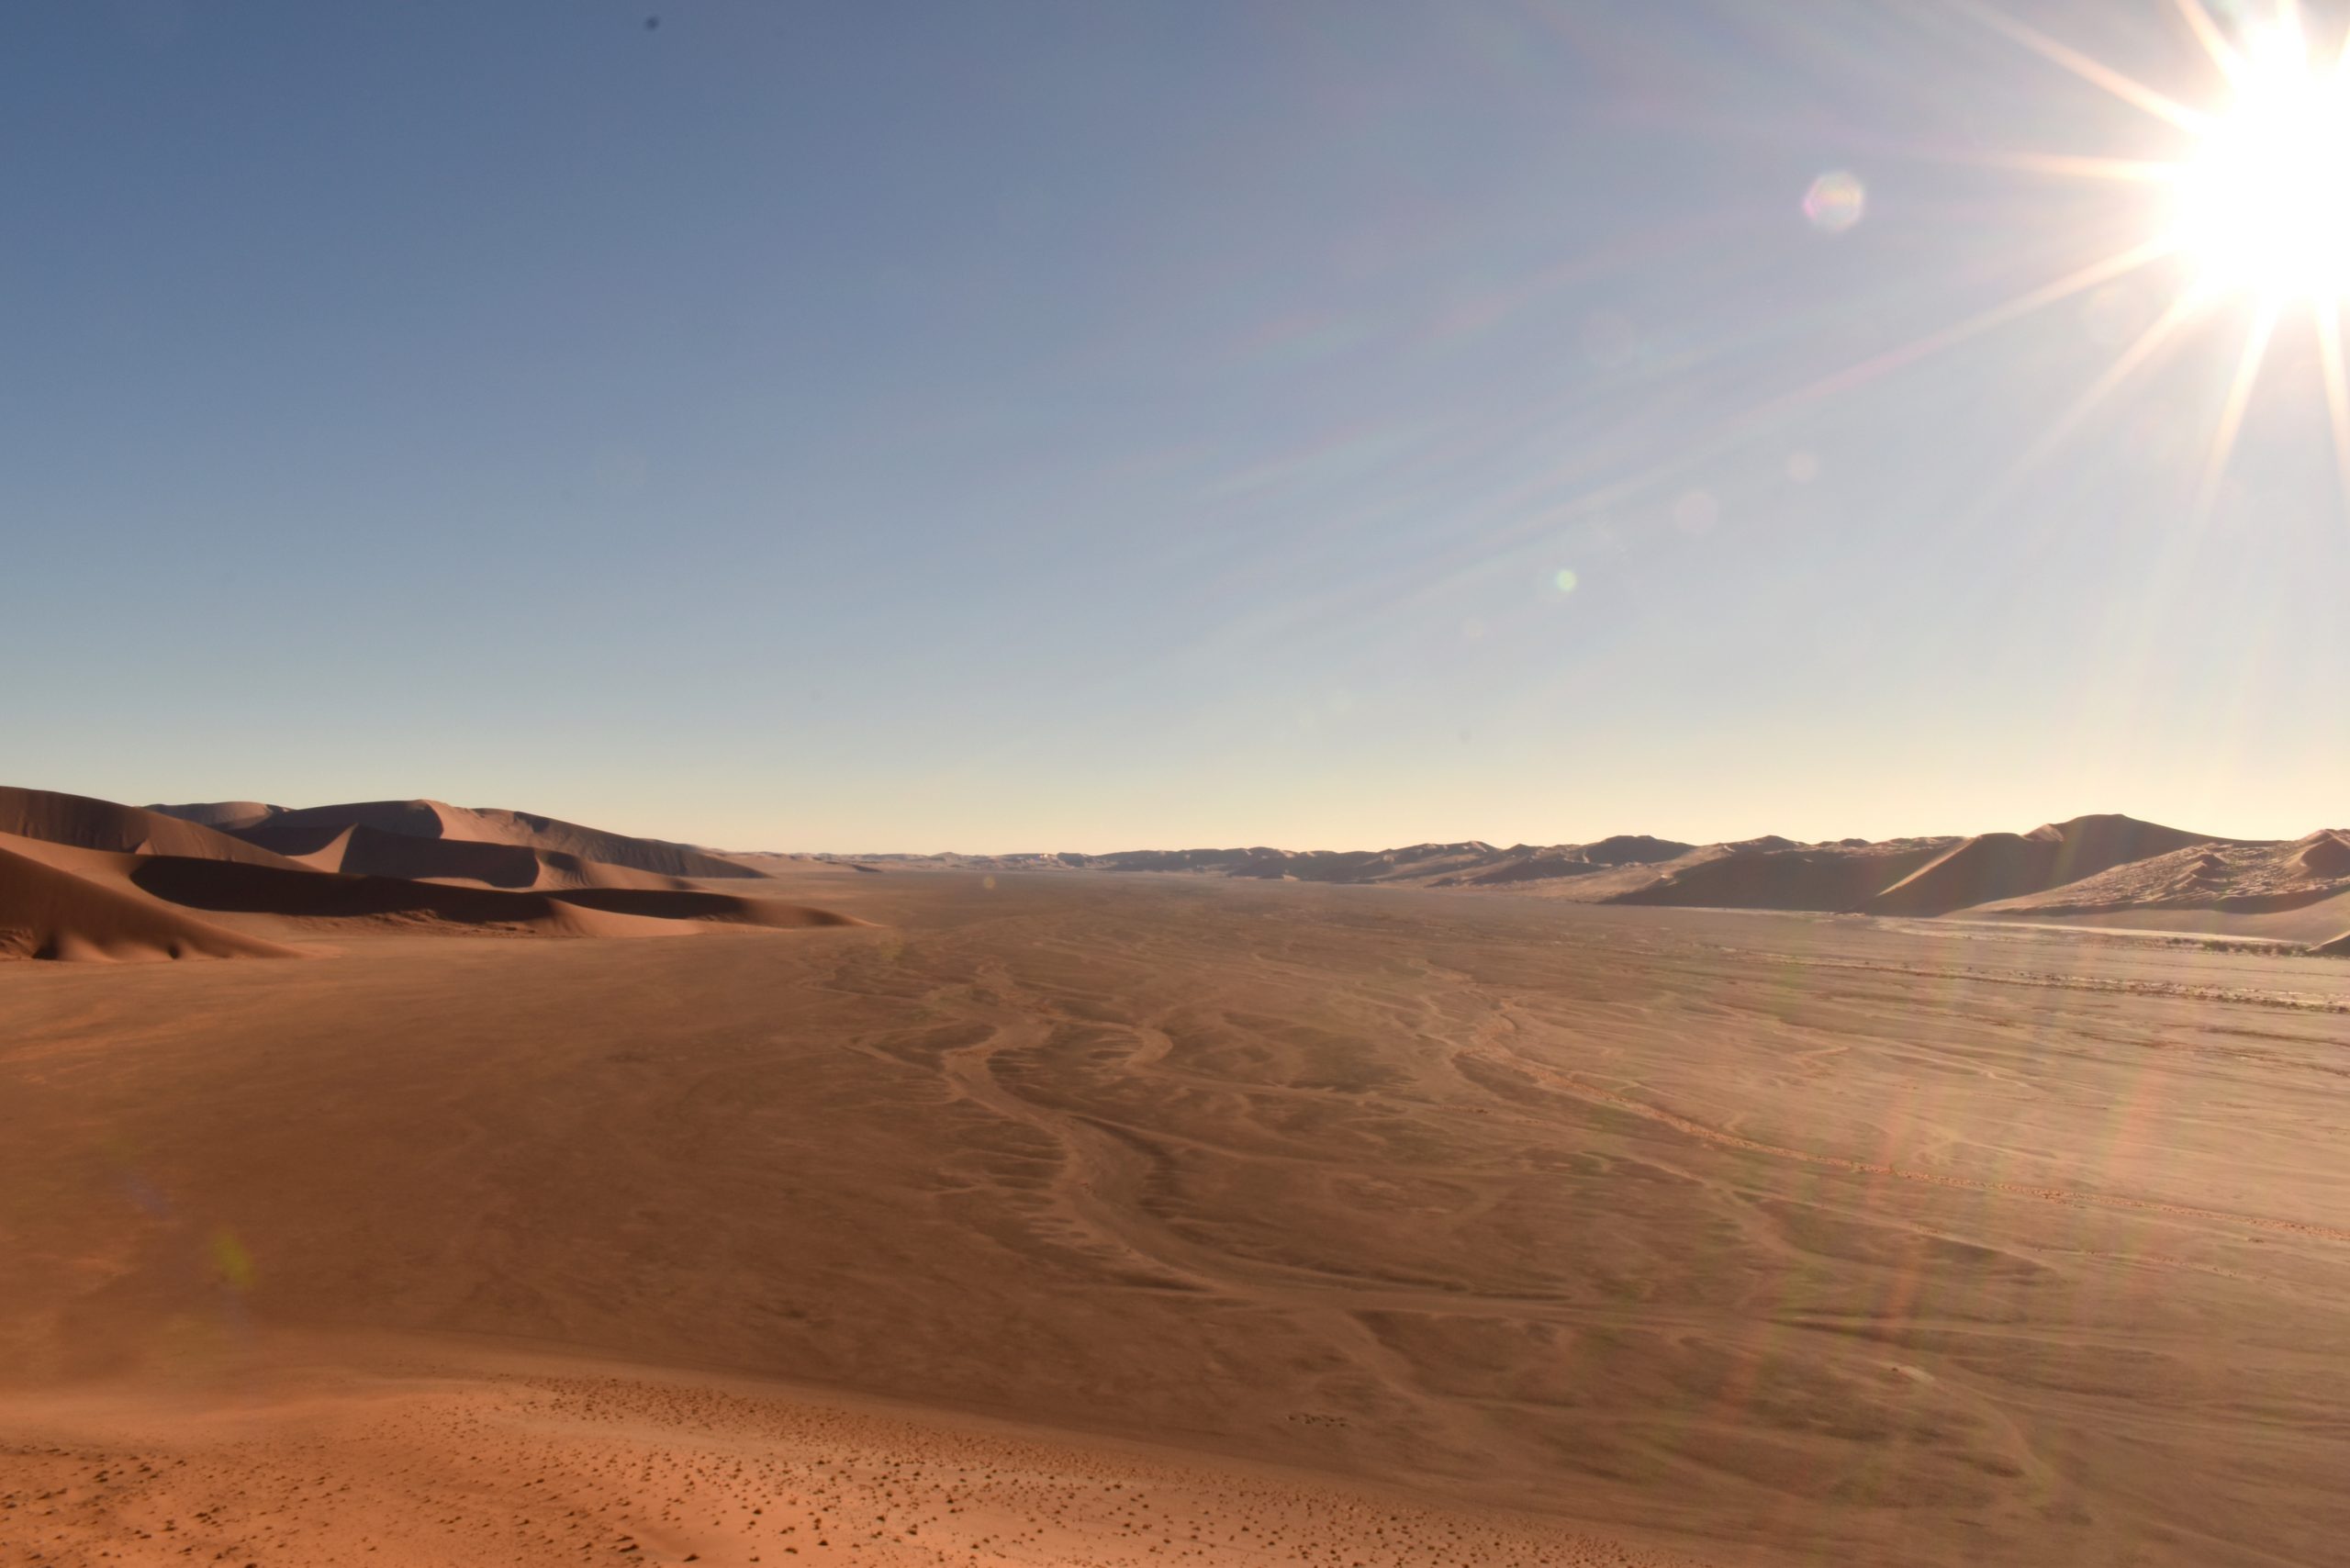 Dry landscape in Namibia. Credit: Dr Callum Munday.